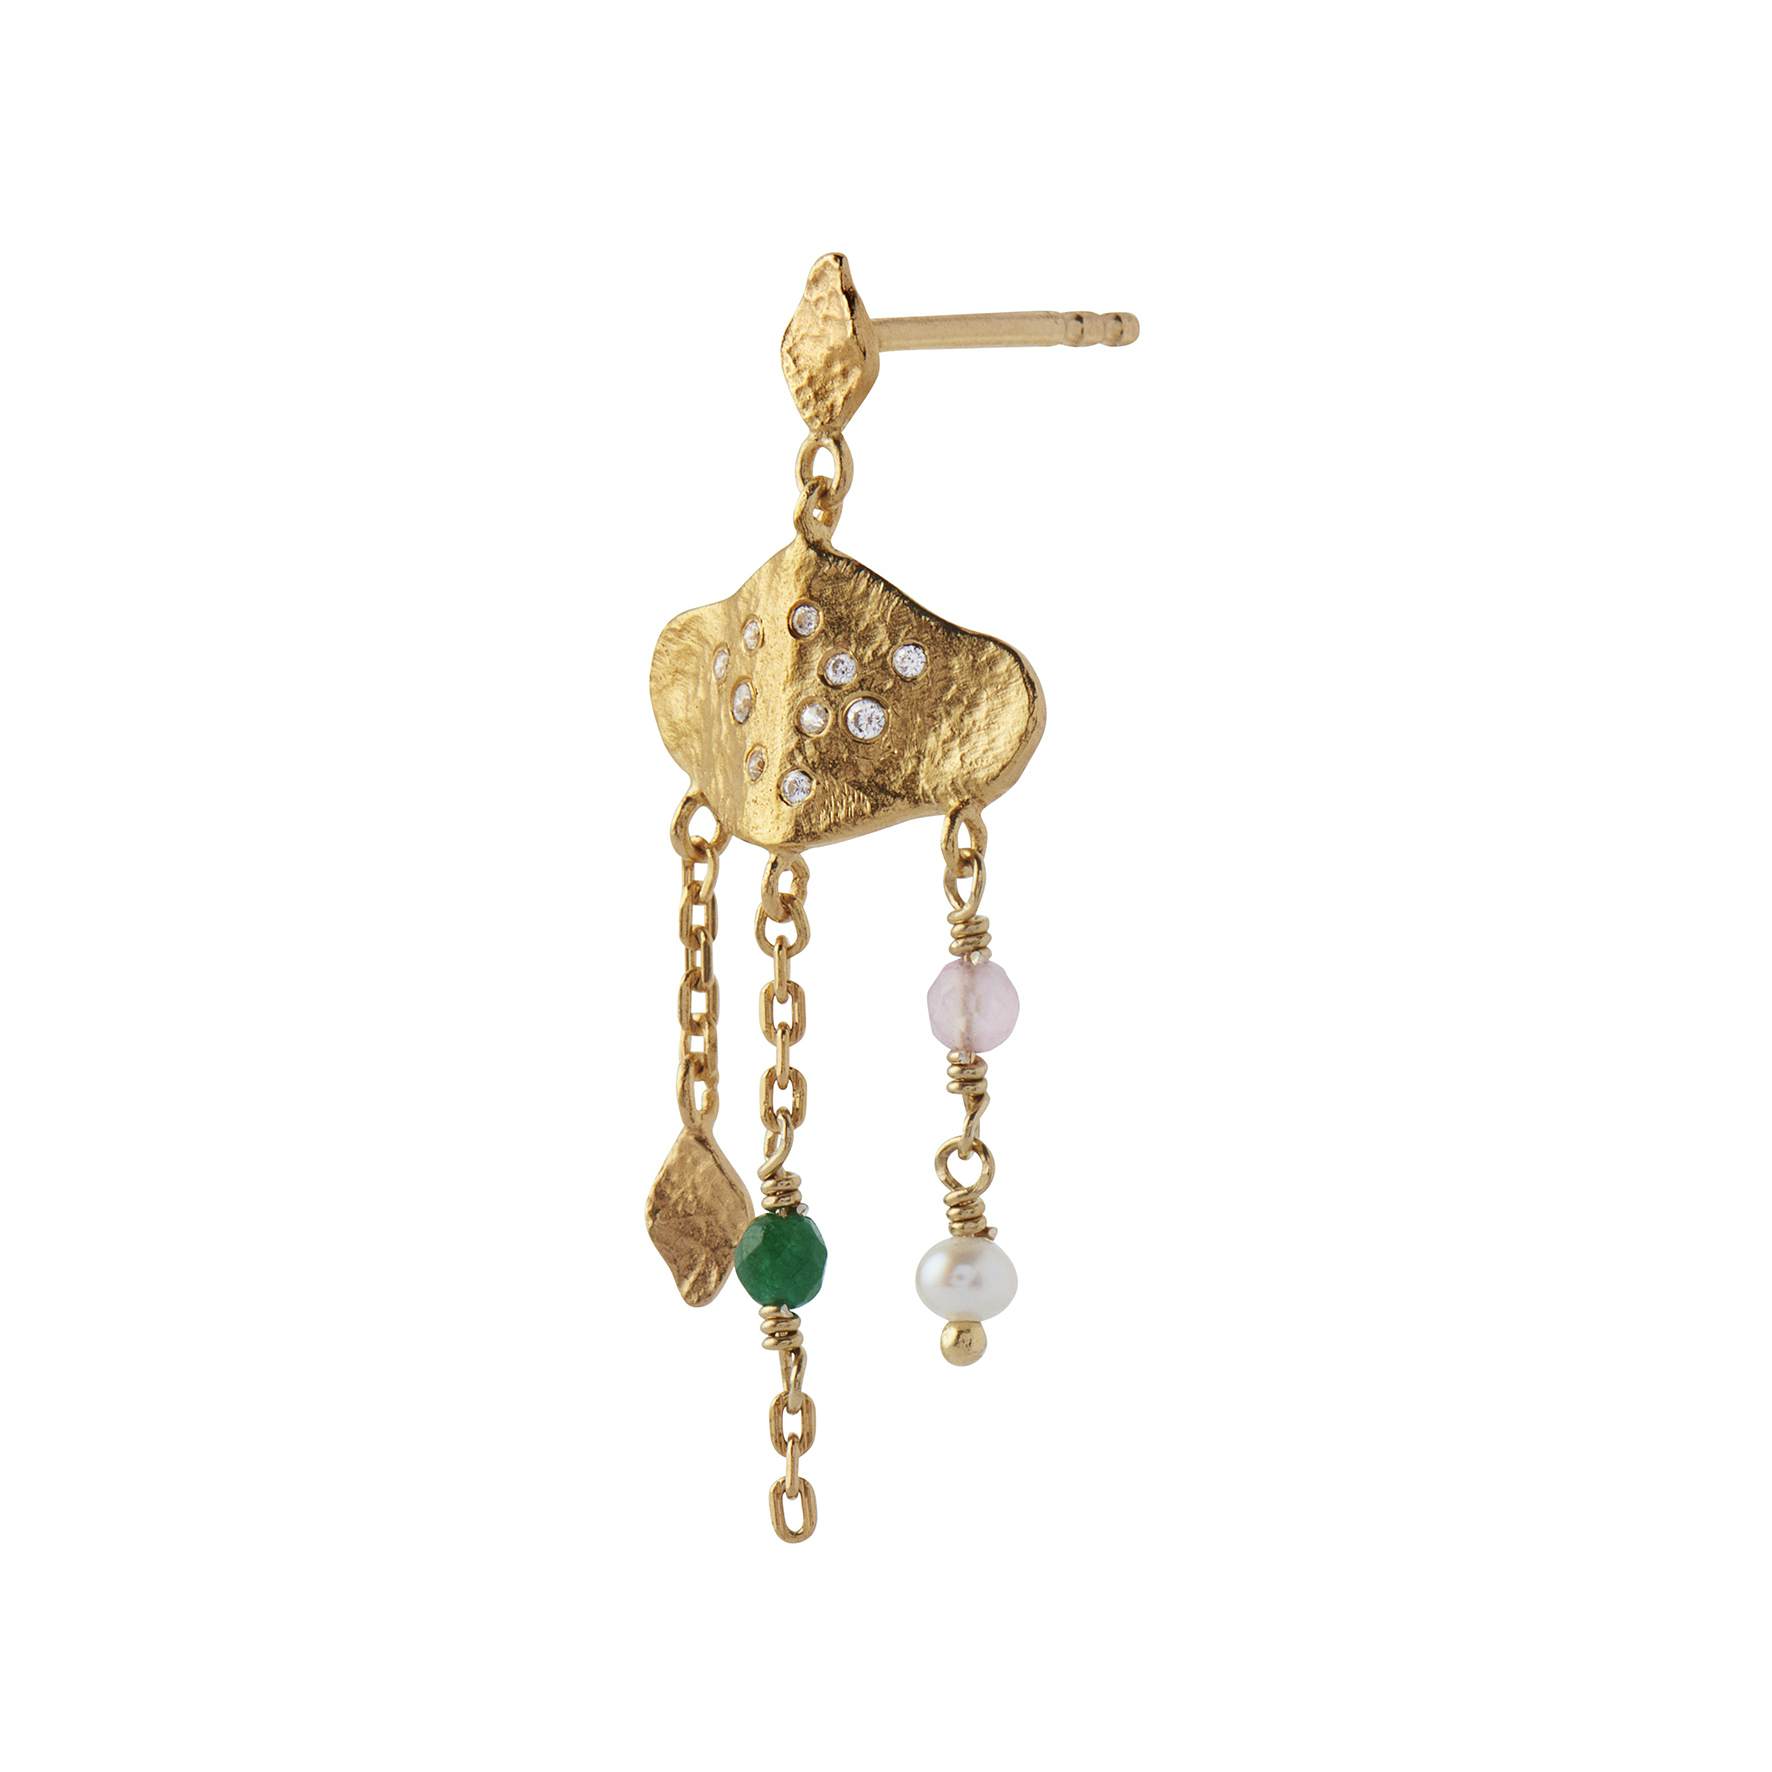 Ile De L'amour With Dancing Stones Earring fra STINE A Jewelry i Forgyldt-Sølv Sterling 925